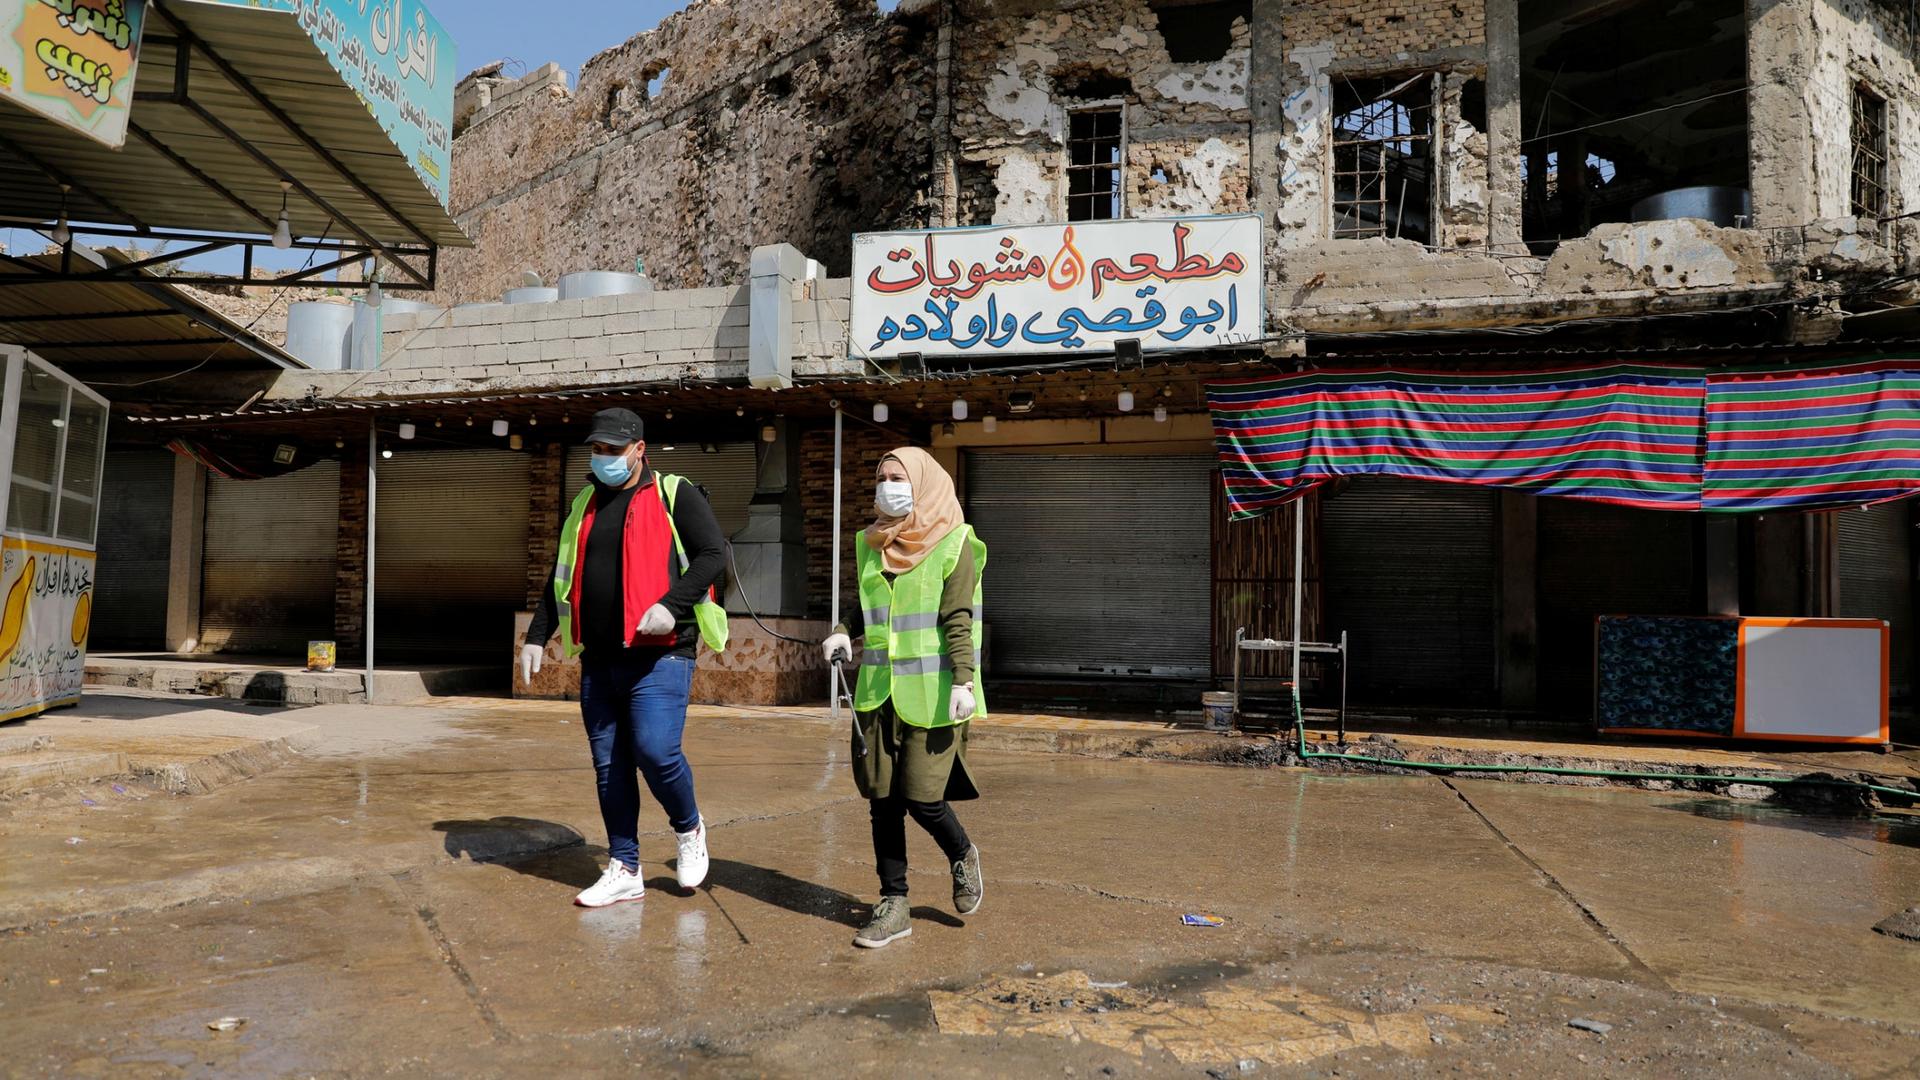 Two young people are shown walking in an empty courtyard and wearing safety vests and protective face masks.